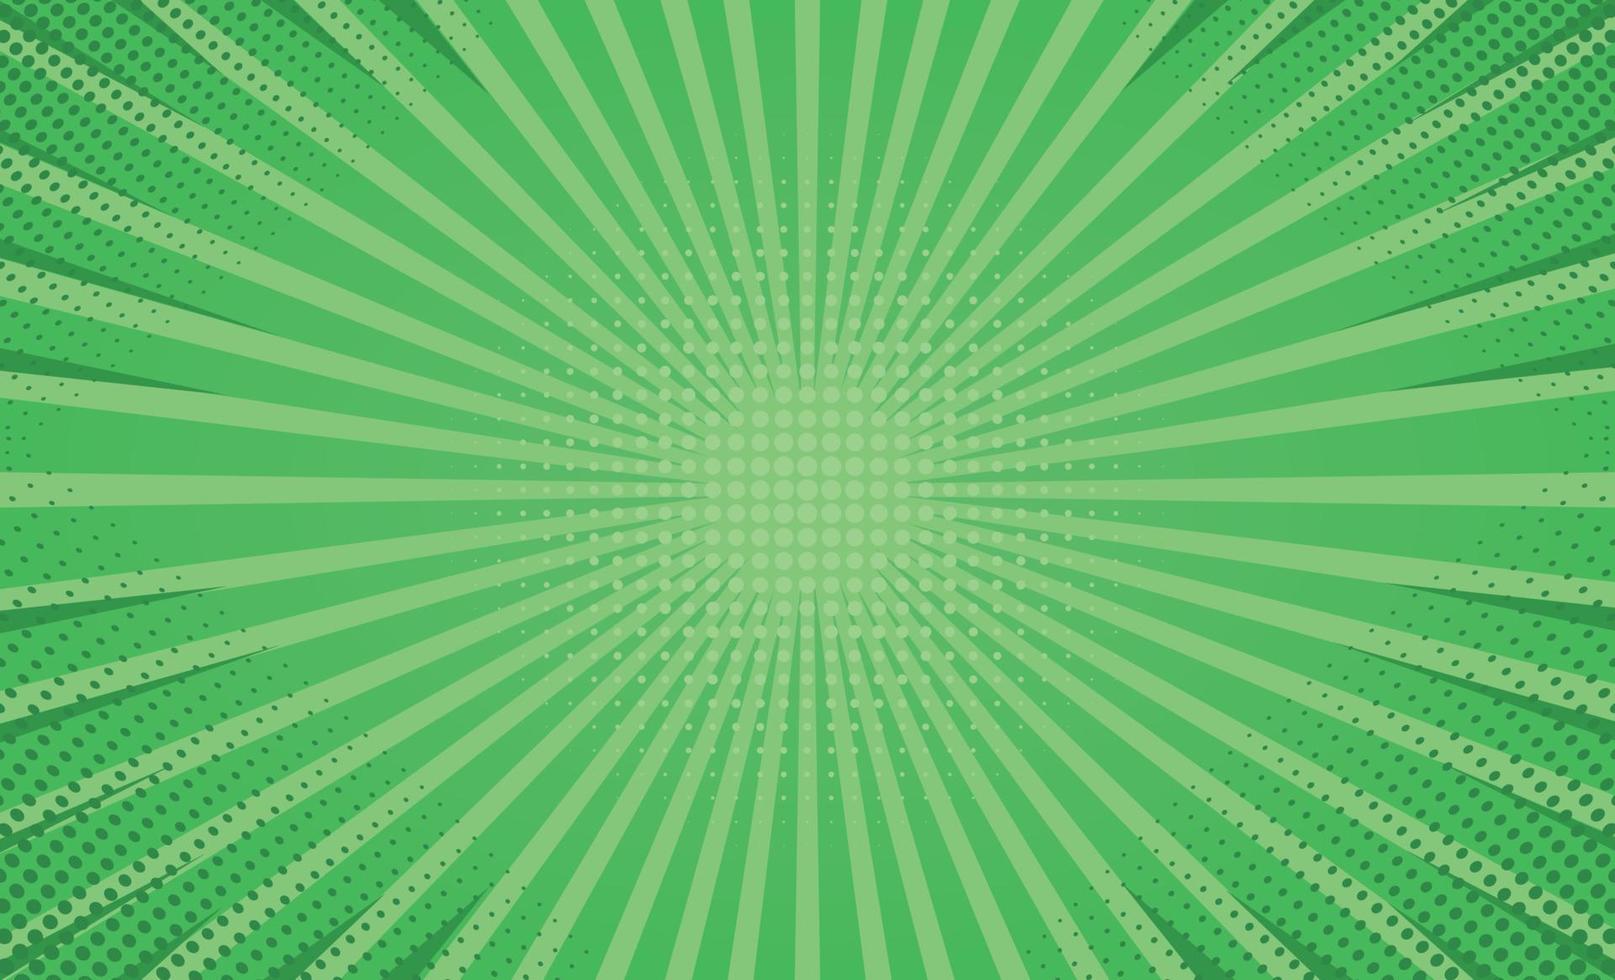 abstract green retro background with halftone vector